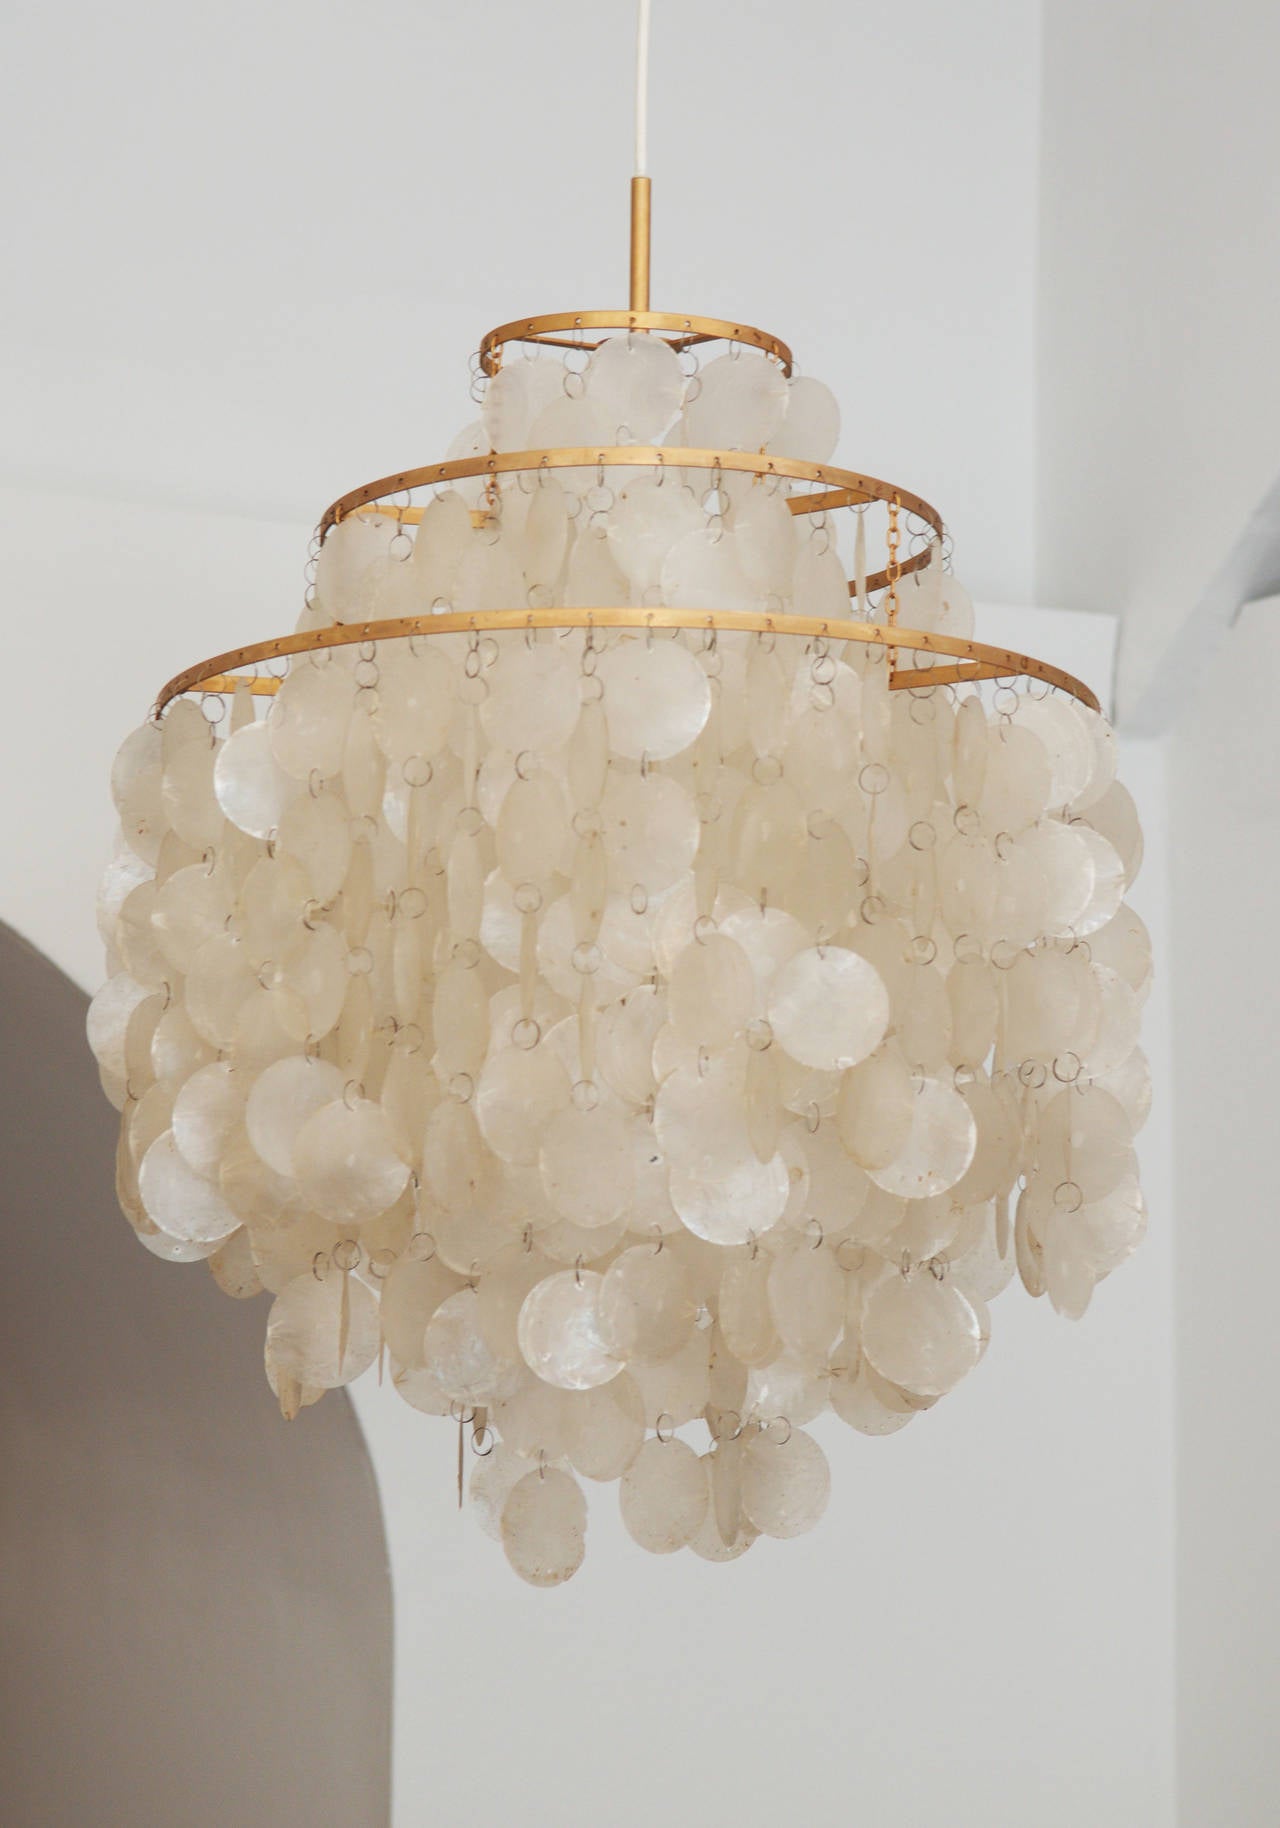 Capiz shell chandeliers from about 1960s designed by Verner Panton.

the length is about two meters and the cable can be shorten.